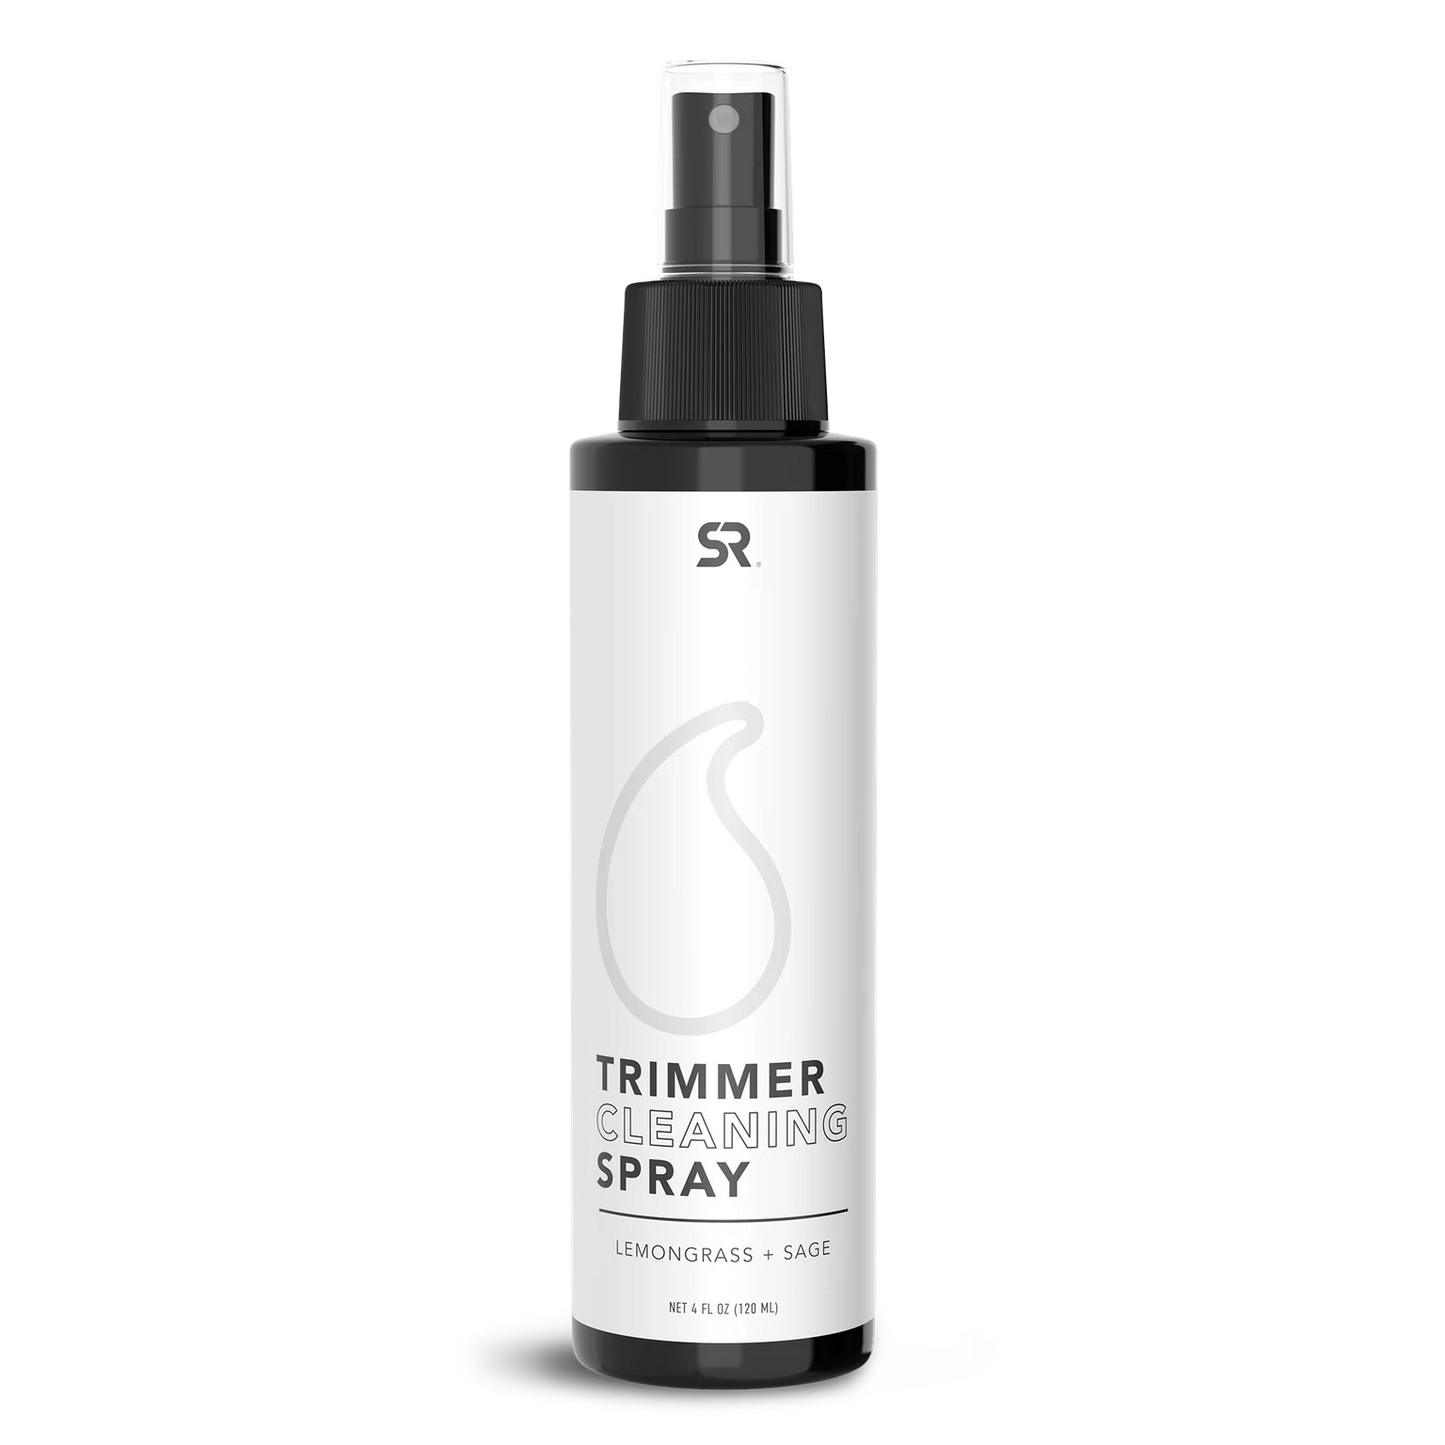 Trimmer Cleaning Spray